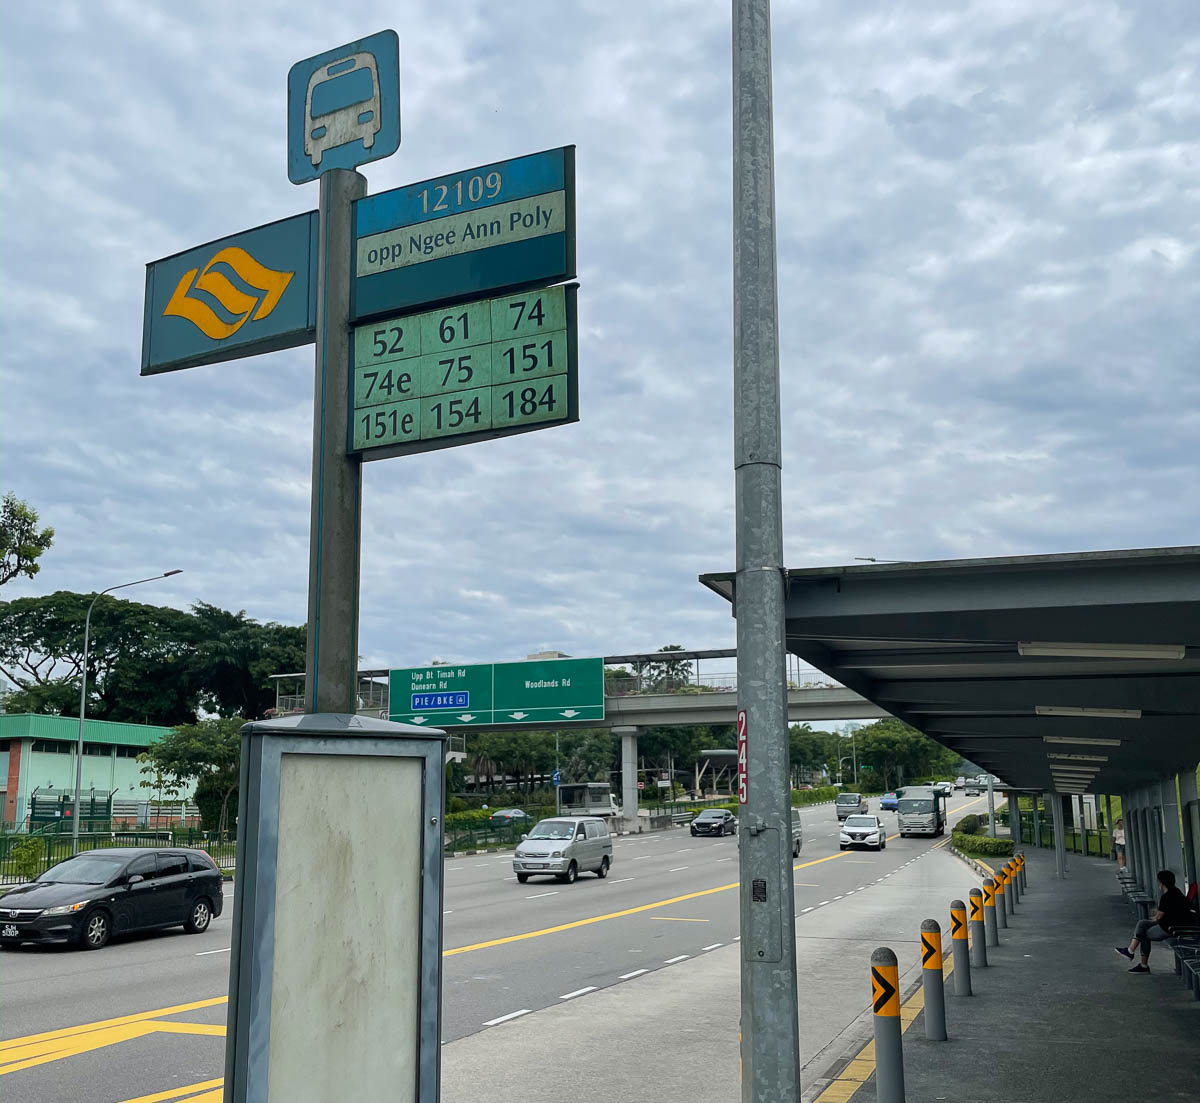 Starting Point of Hike - Oppsite Ngee Ann Poly Bus Stop